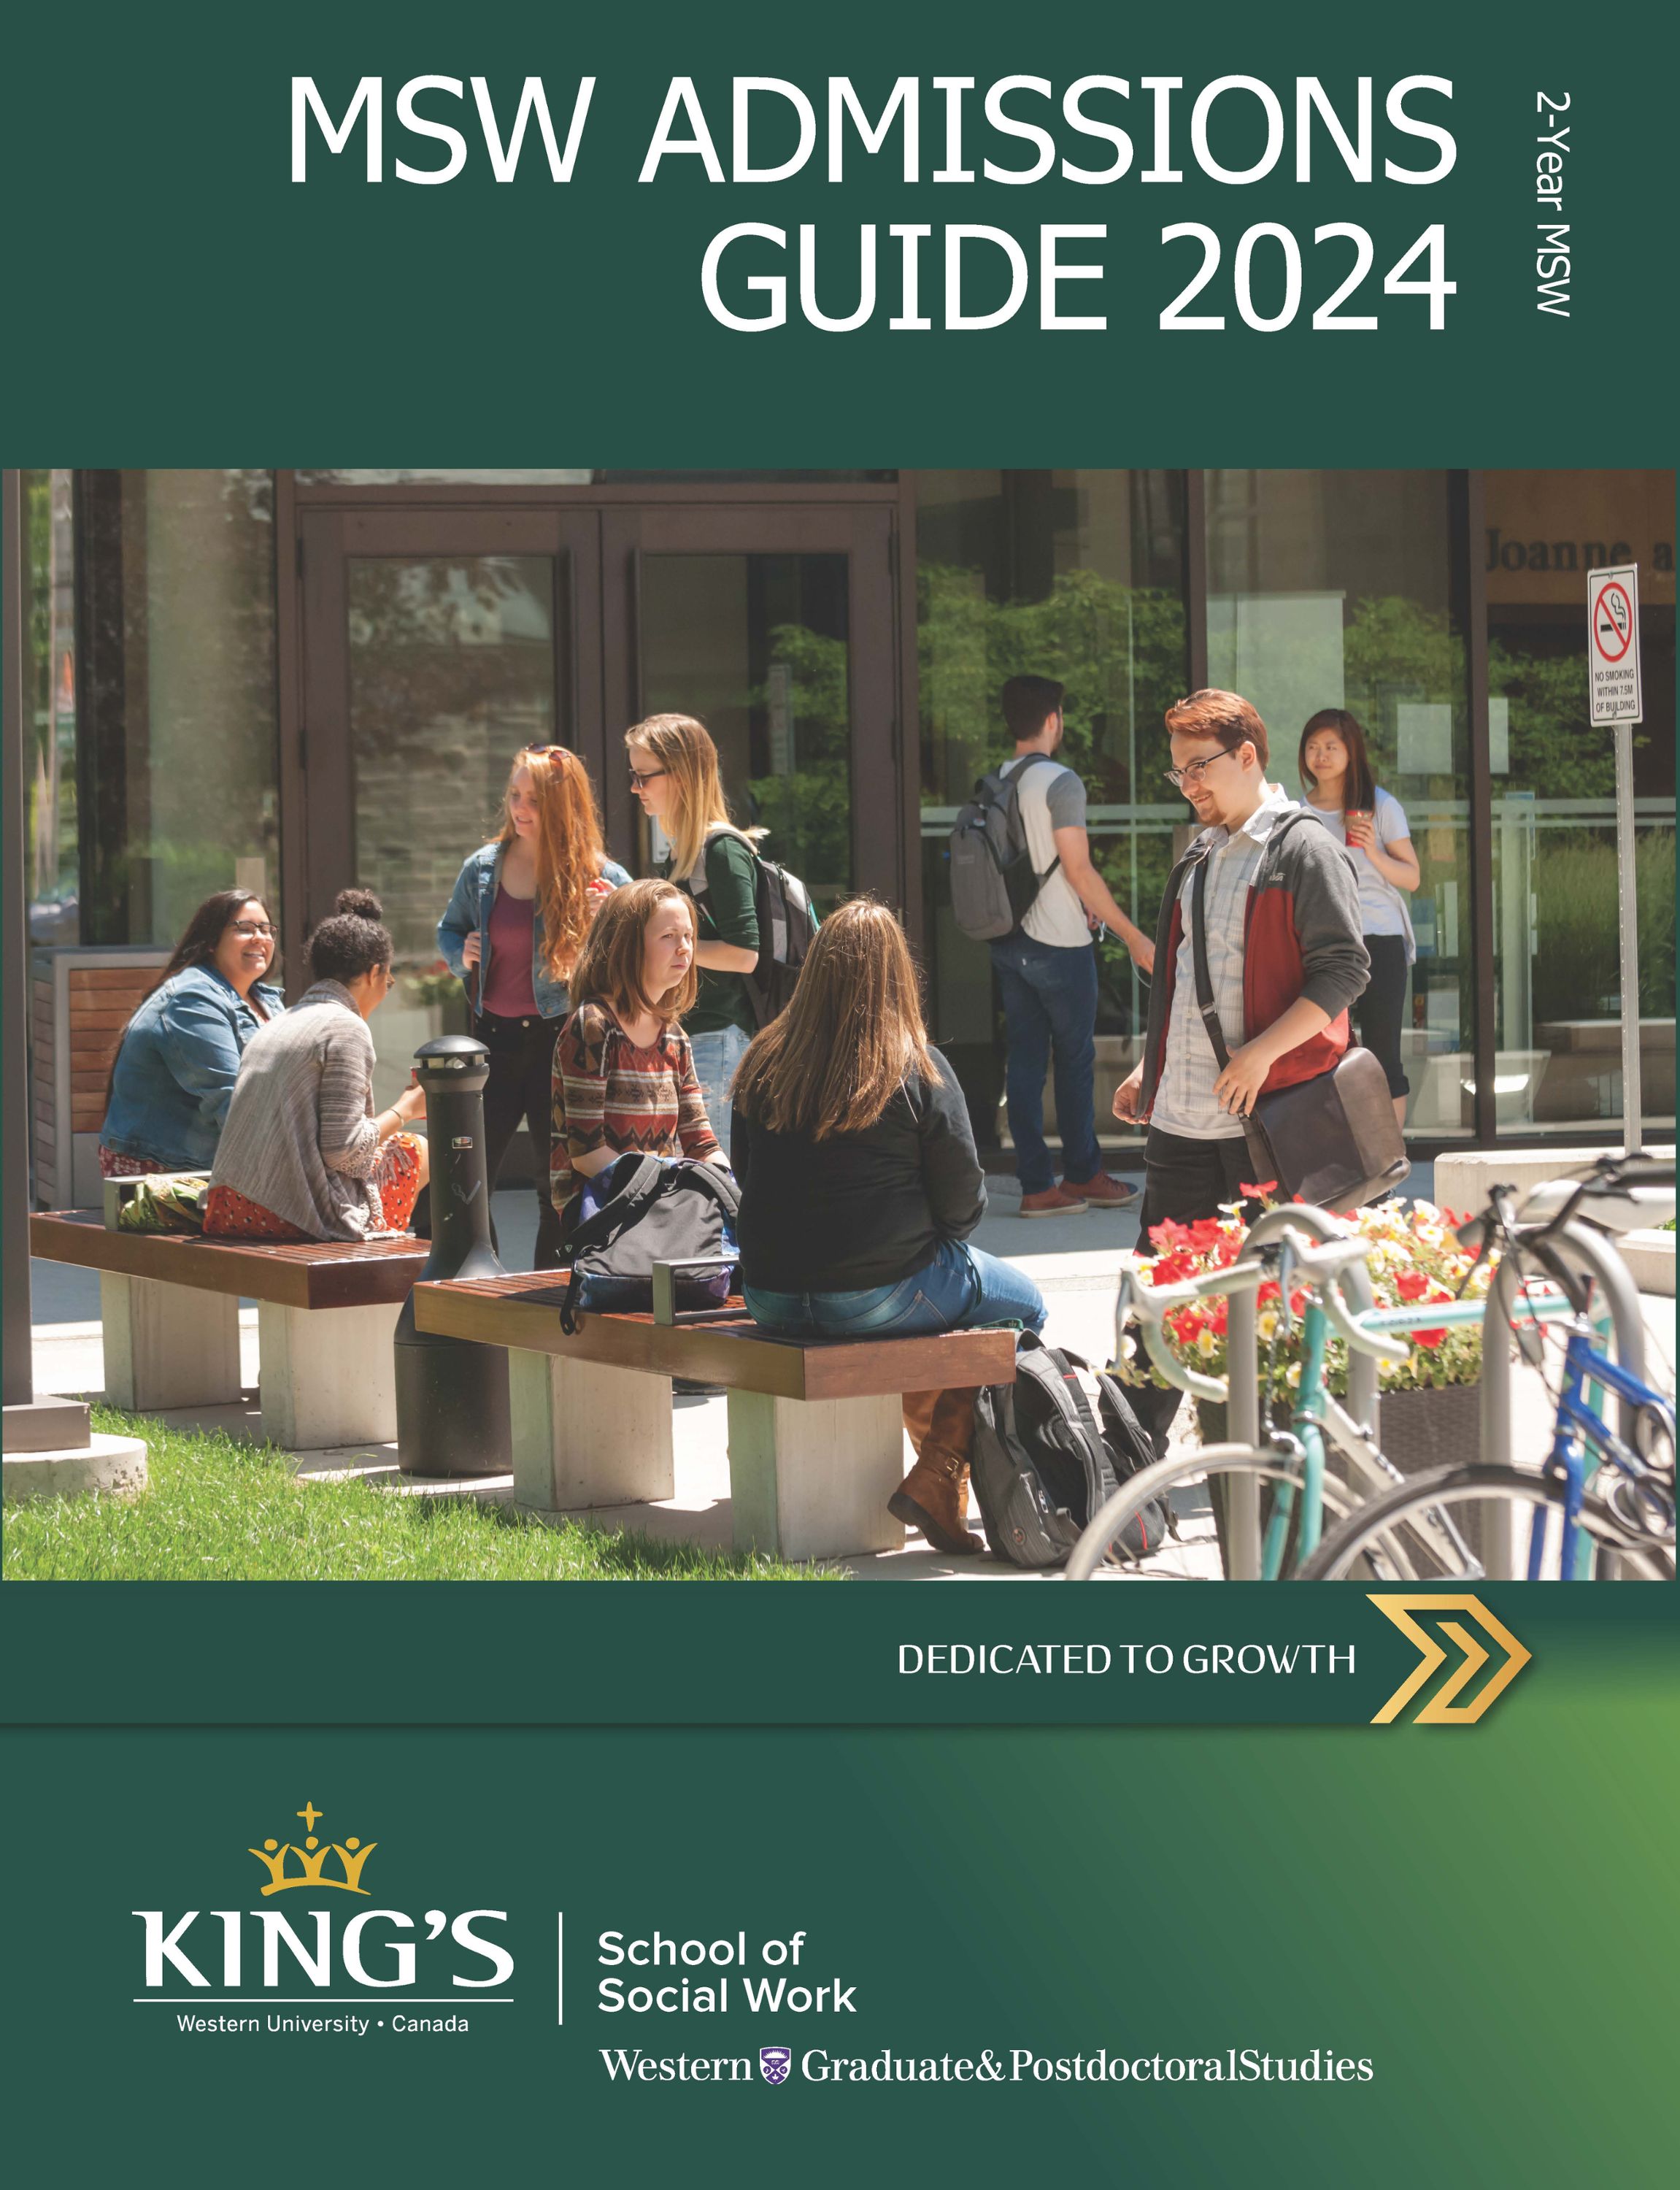 2-Year MSW Admissions Guide Download